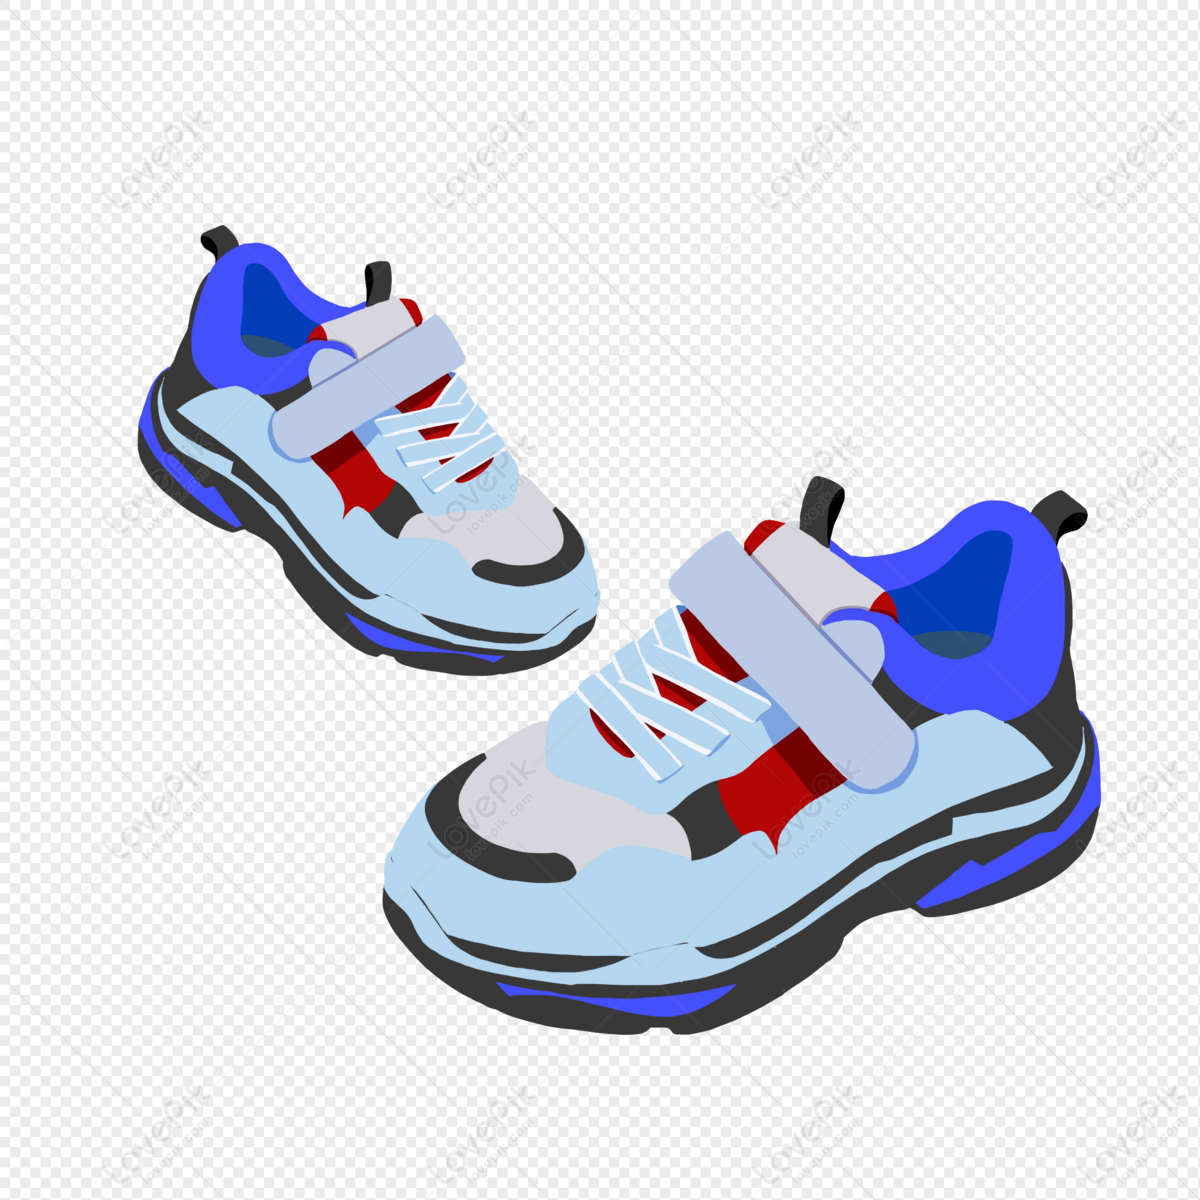 Sneaker shoe image Royalty Free Stock SVG Vector